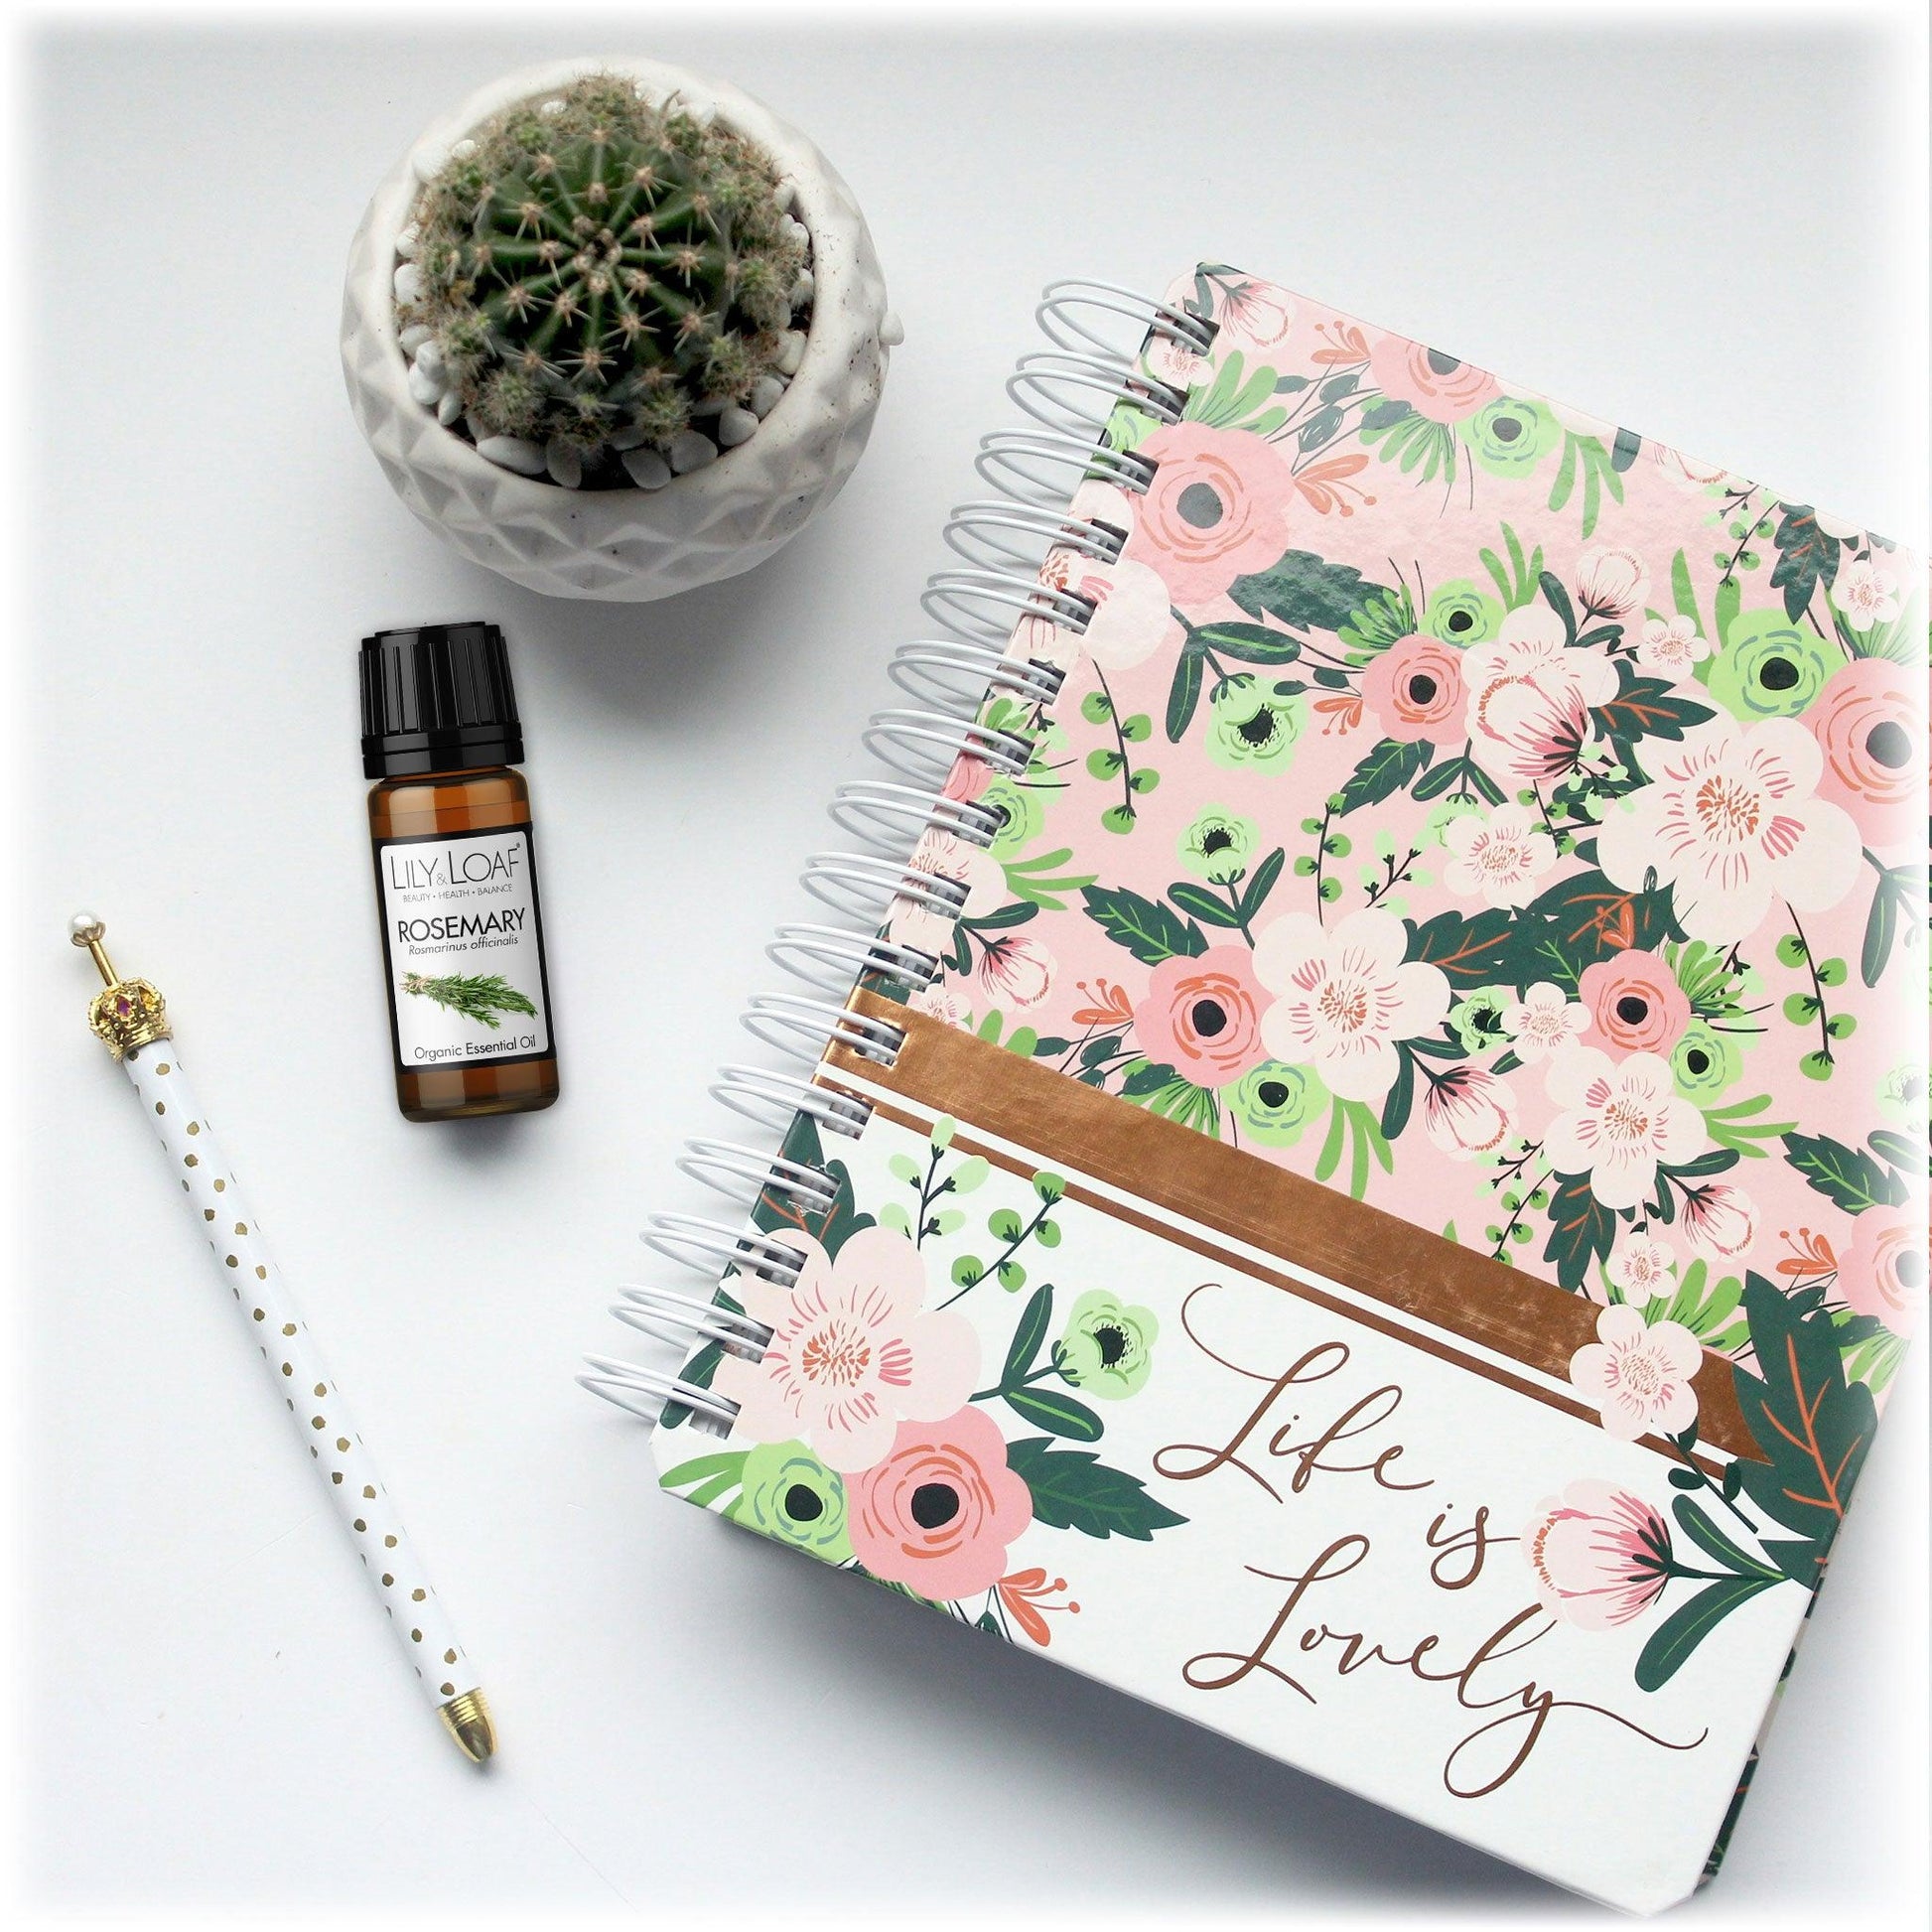 Lily & Loaf Rosemary Organic Essential Oil bottle next to a floral notebook, pen, and potted cactus. Enhances focus and mental clarity for productivity.